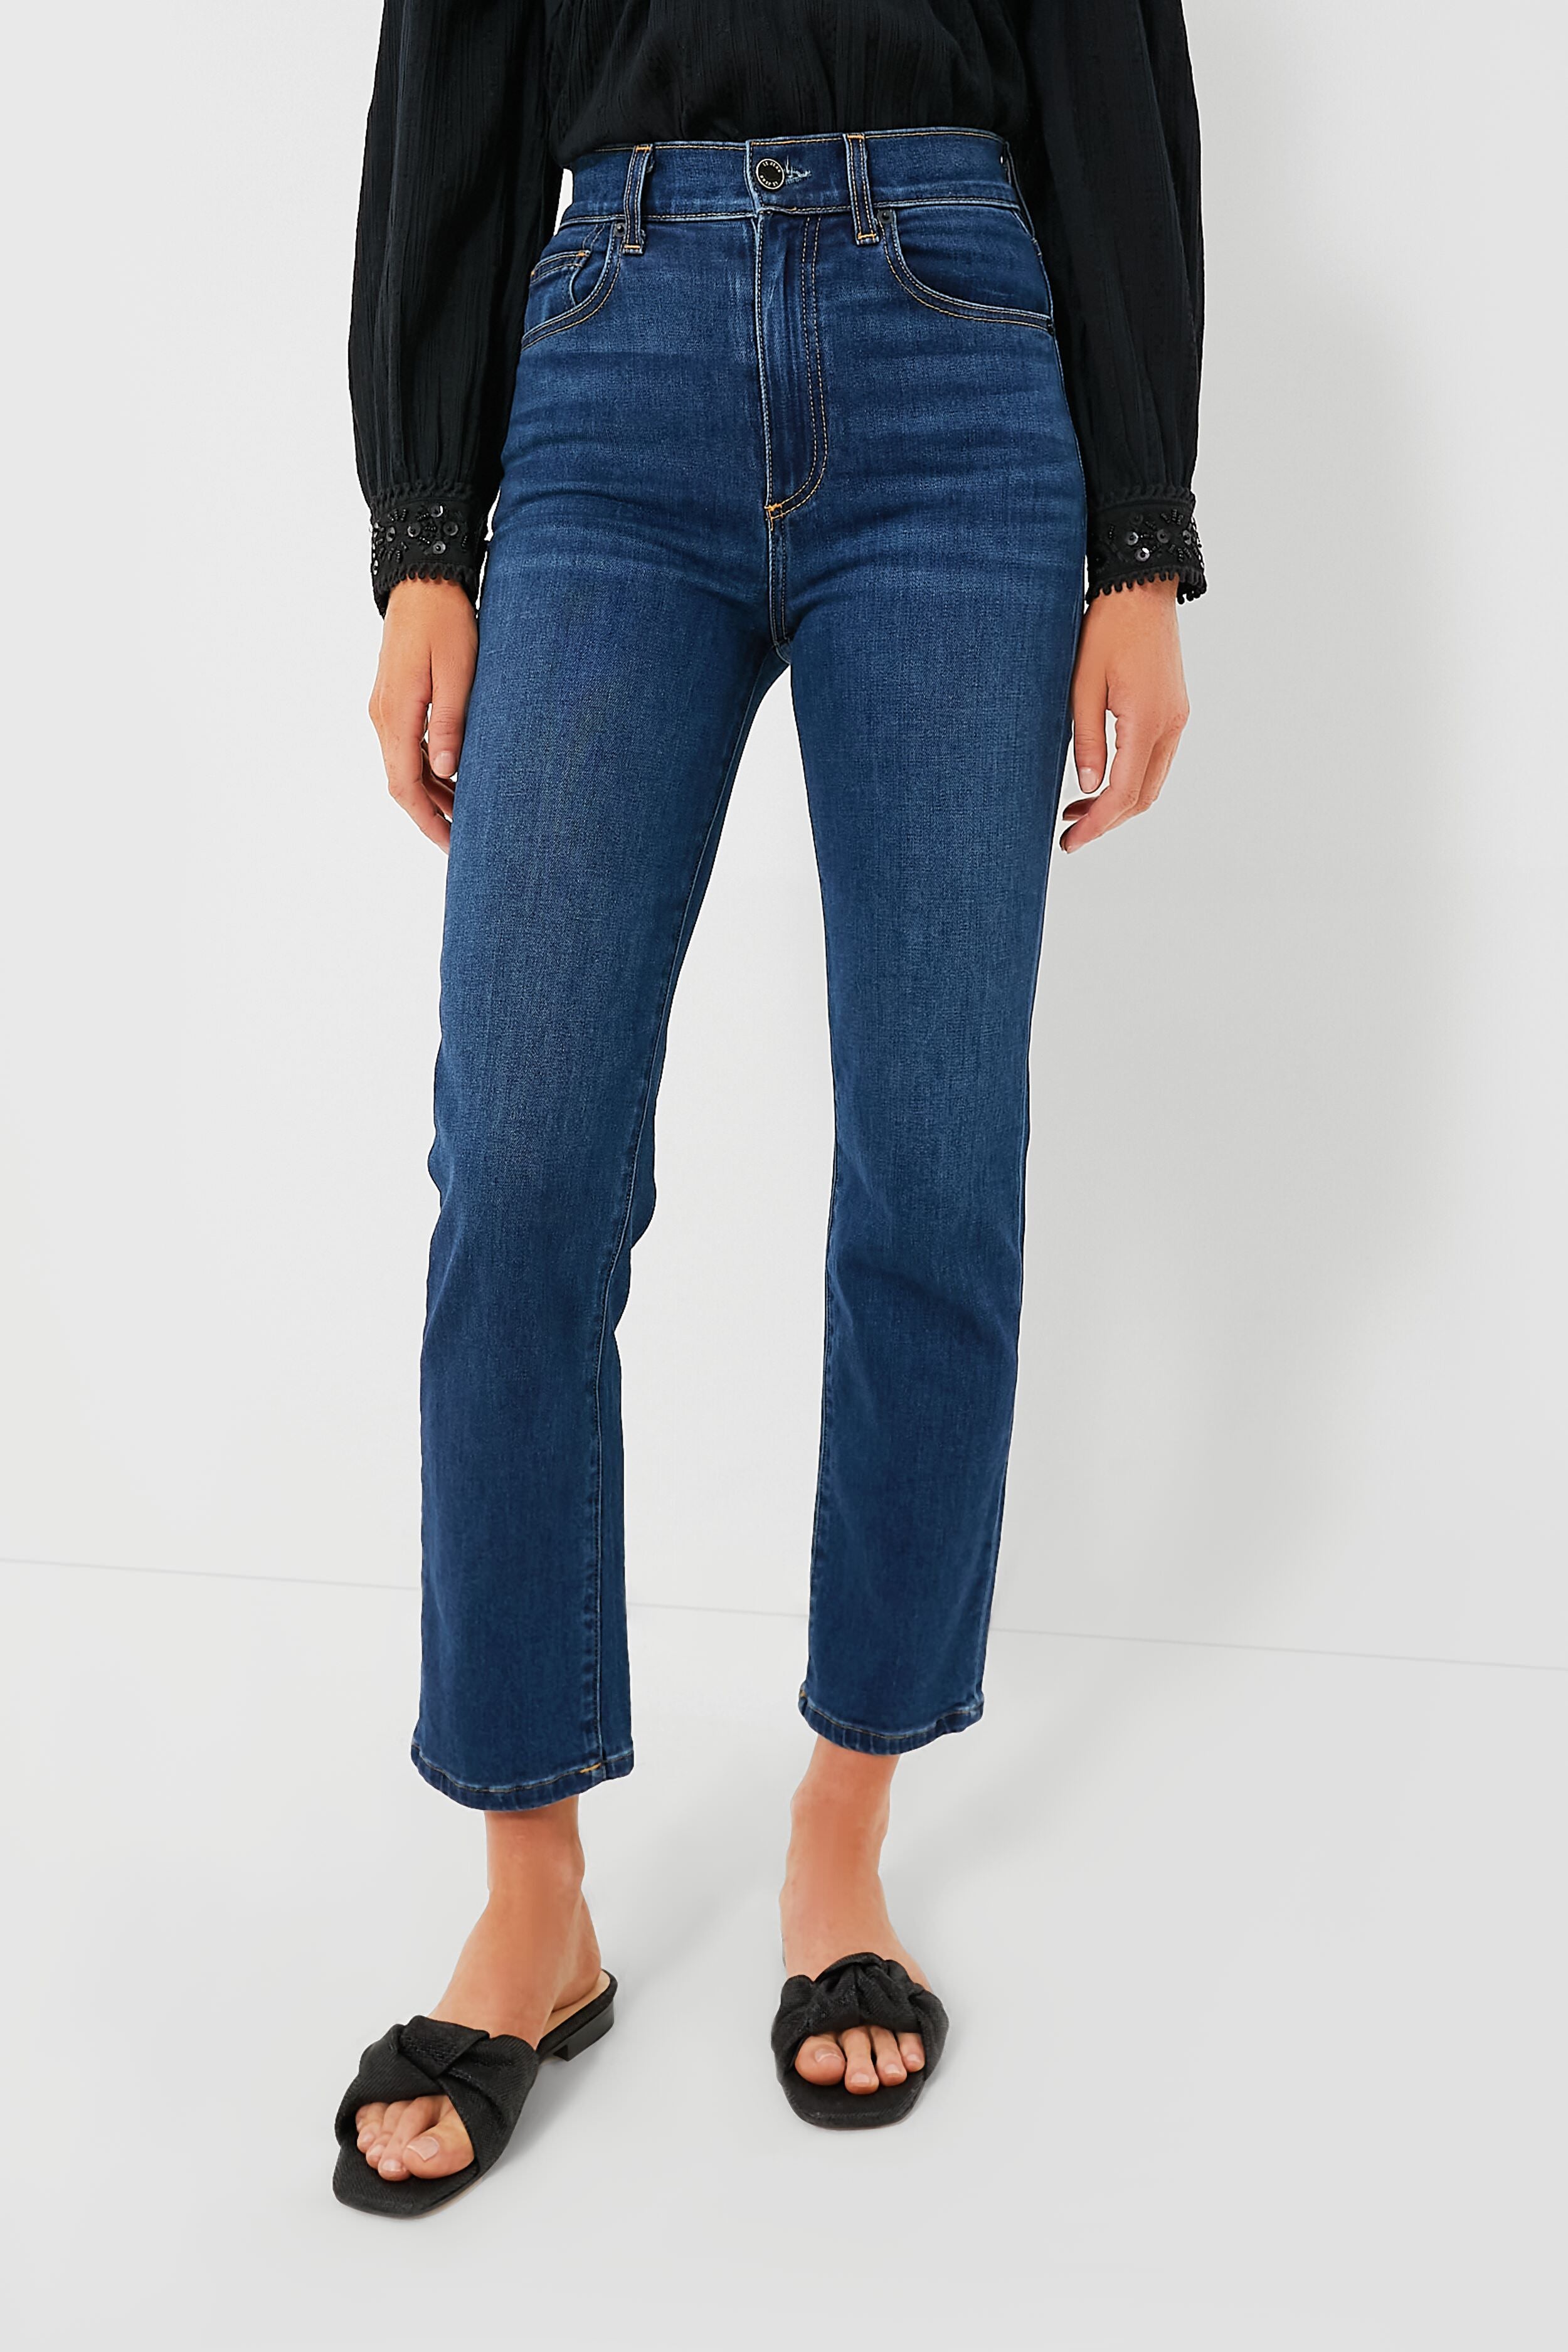 Women's Le Jean High-Waisted Jeans